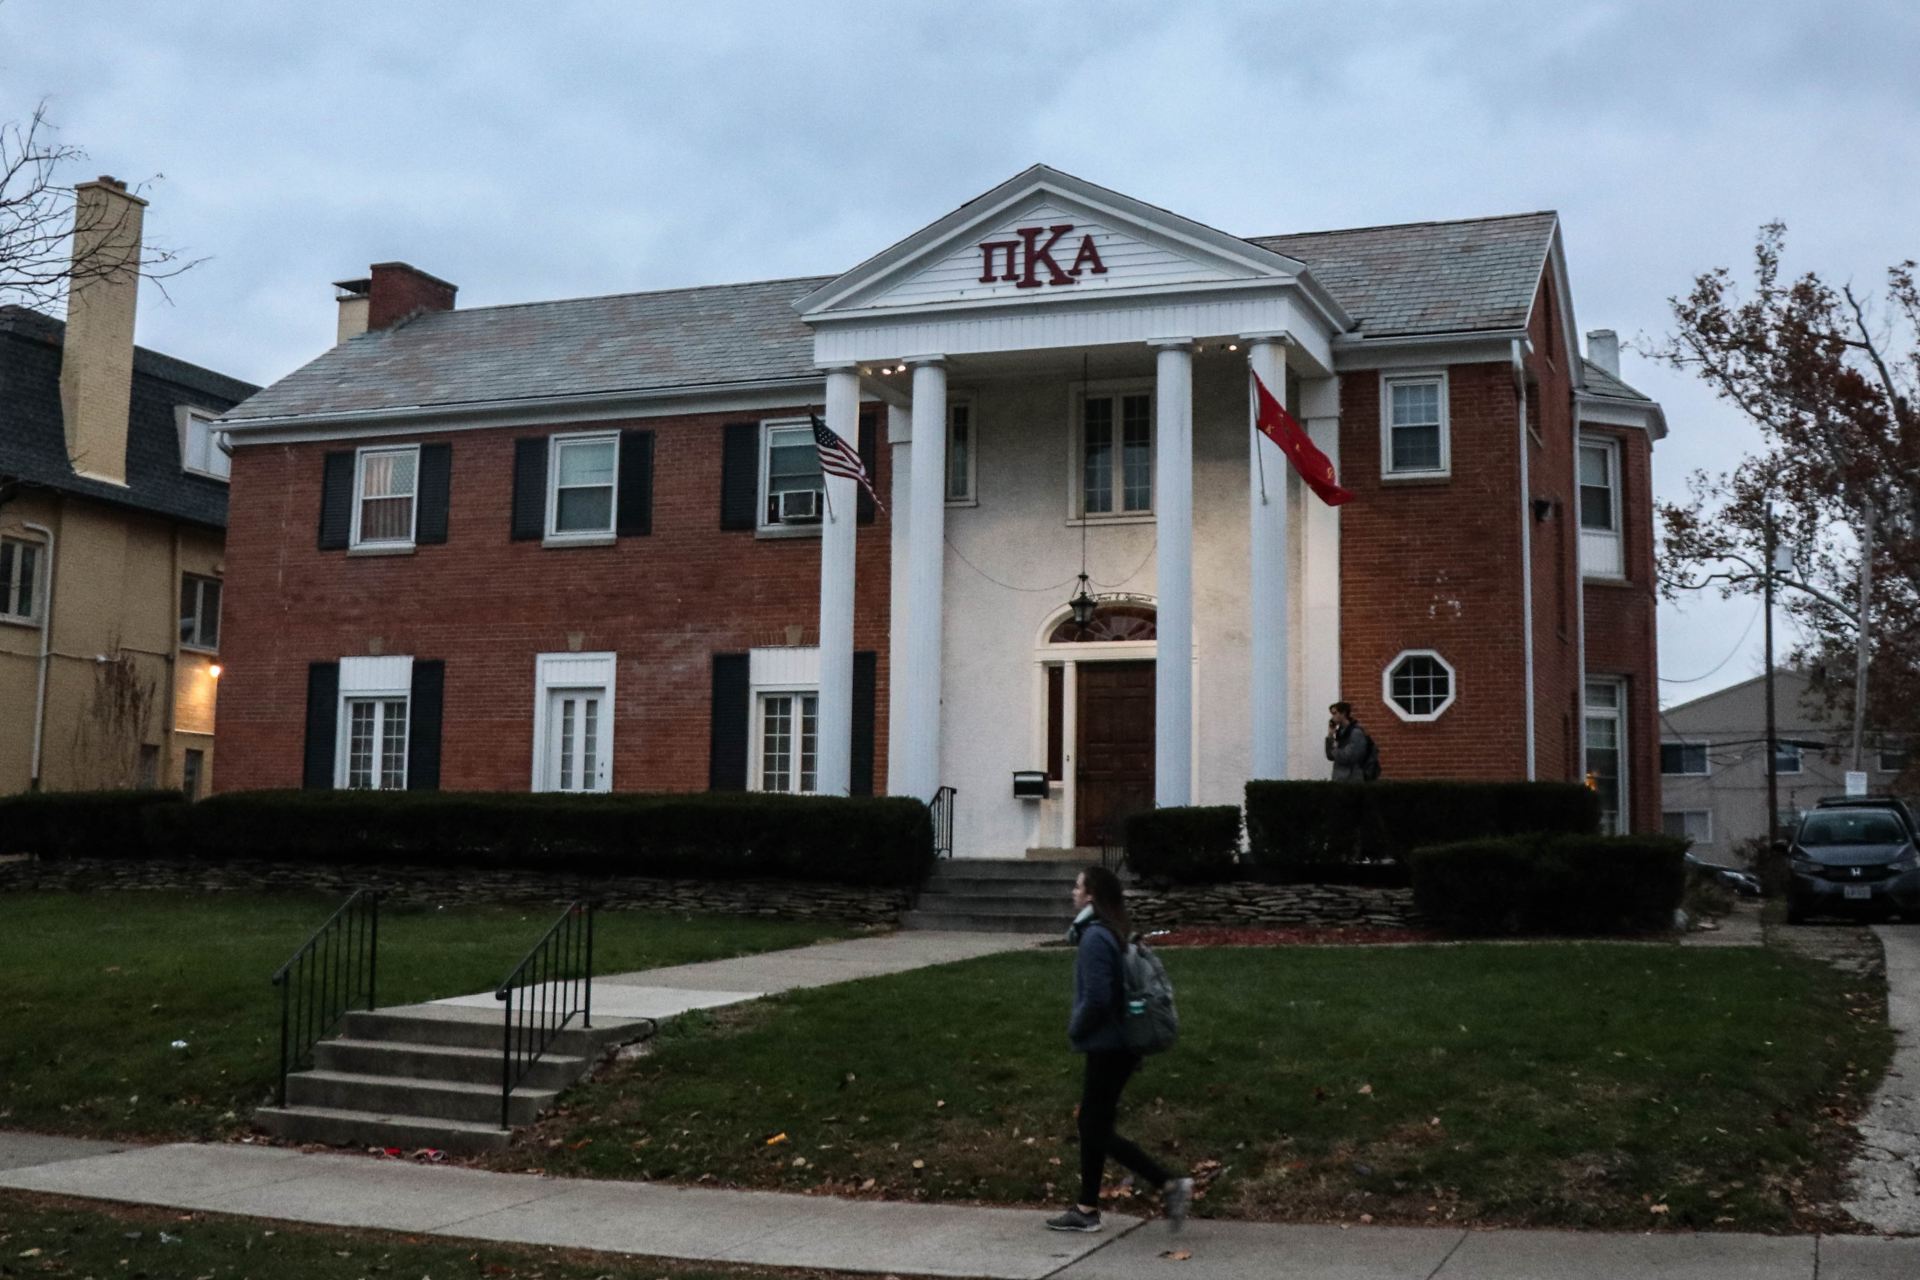 Pike fraternity resigns national charter, loses student organization status